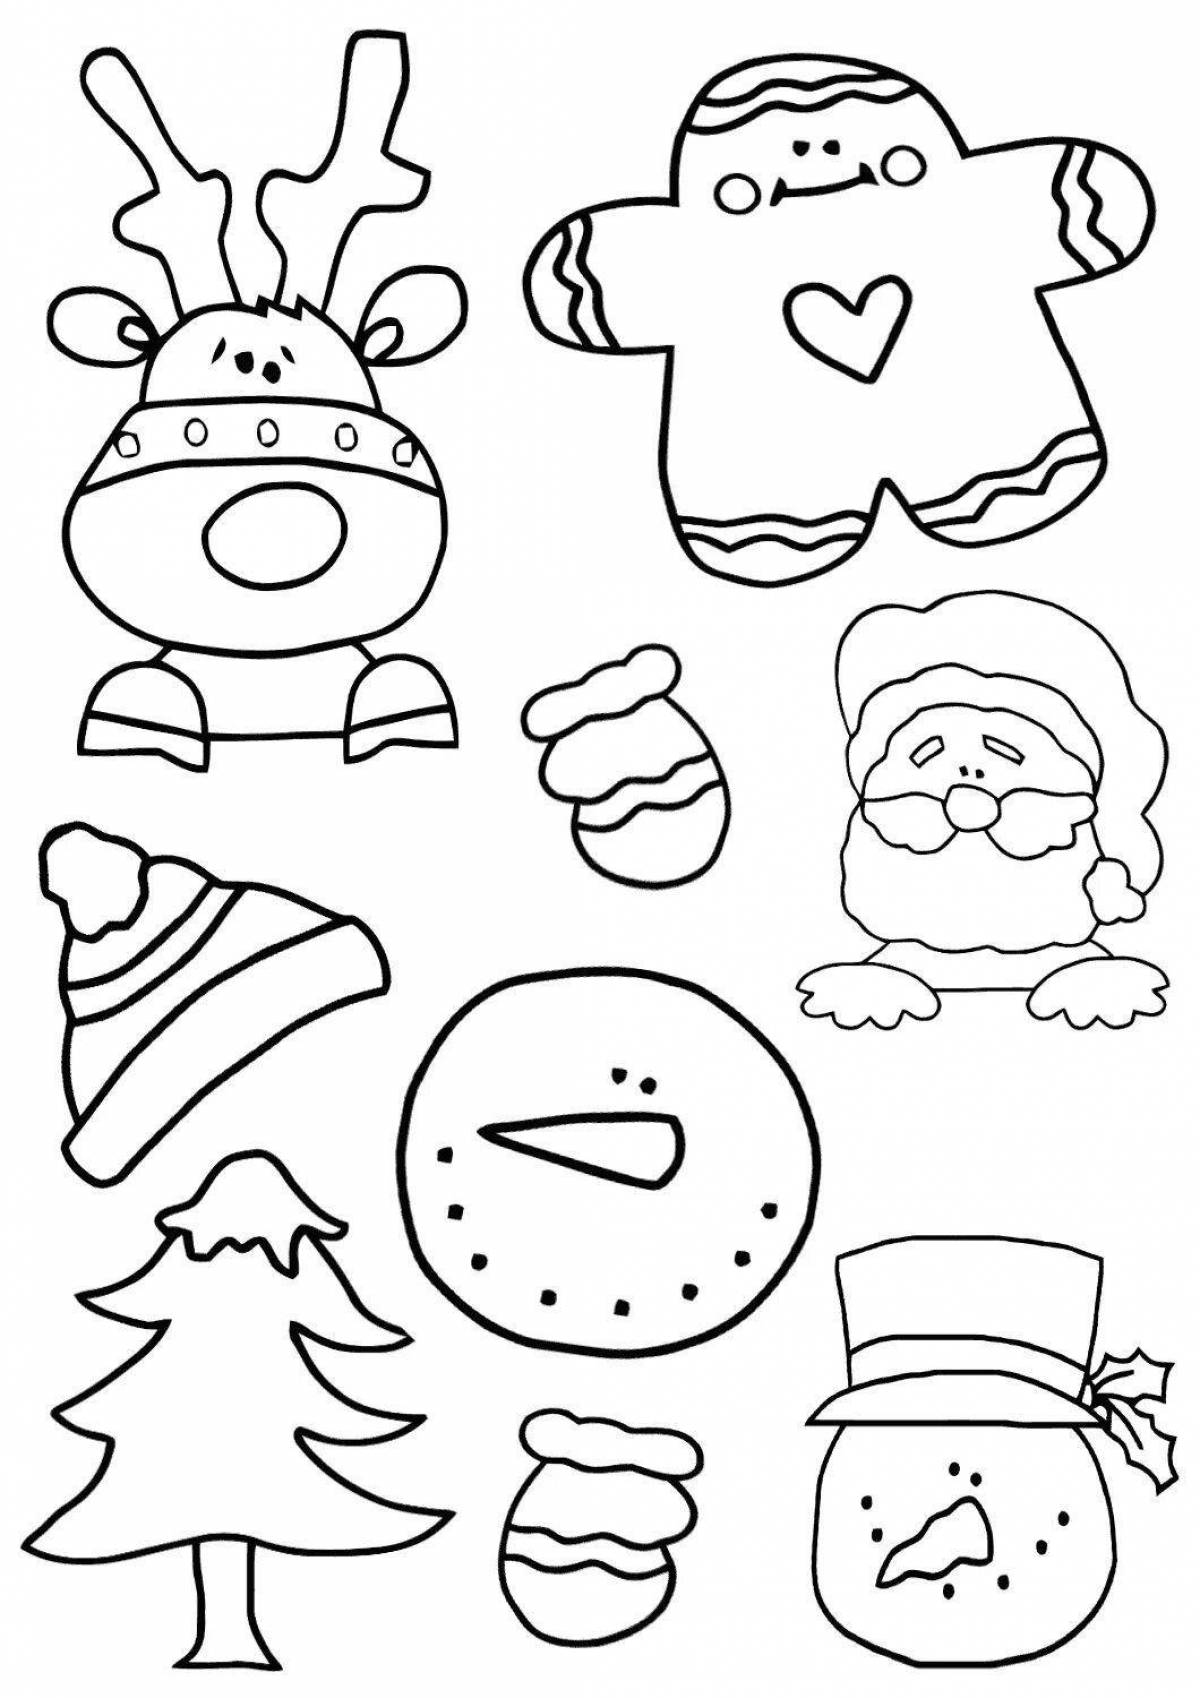 Cute Christmas stickers